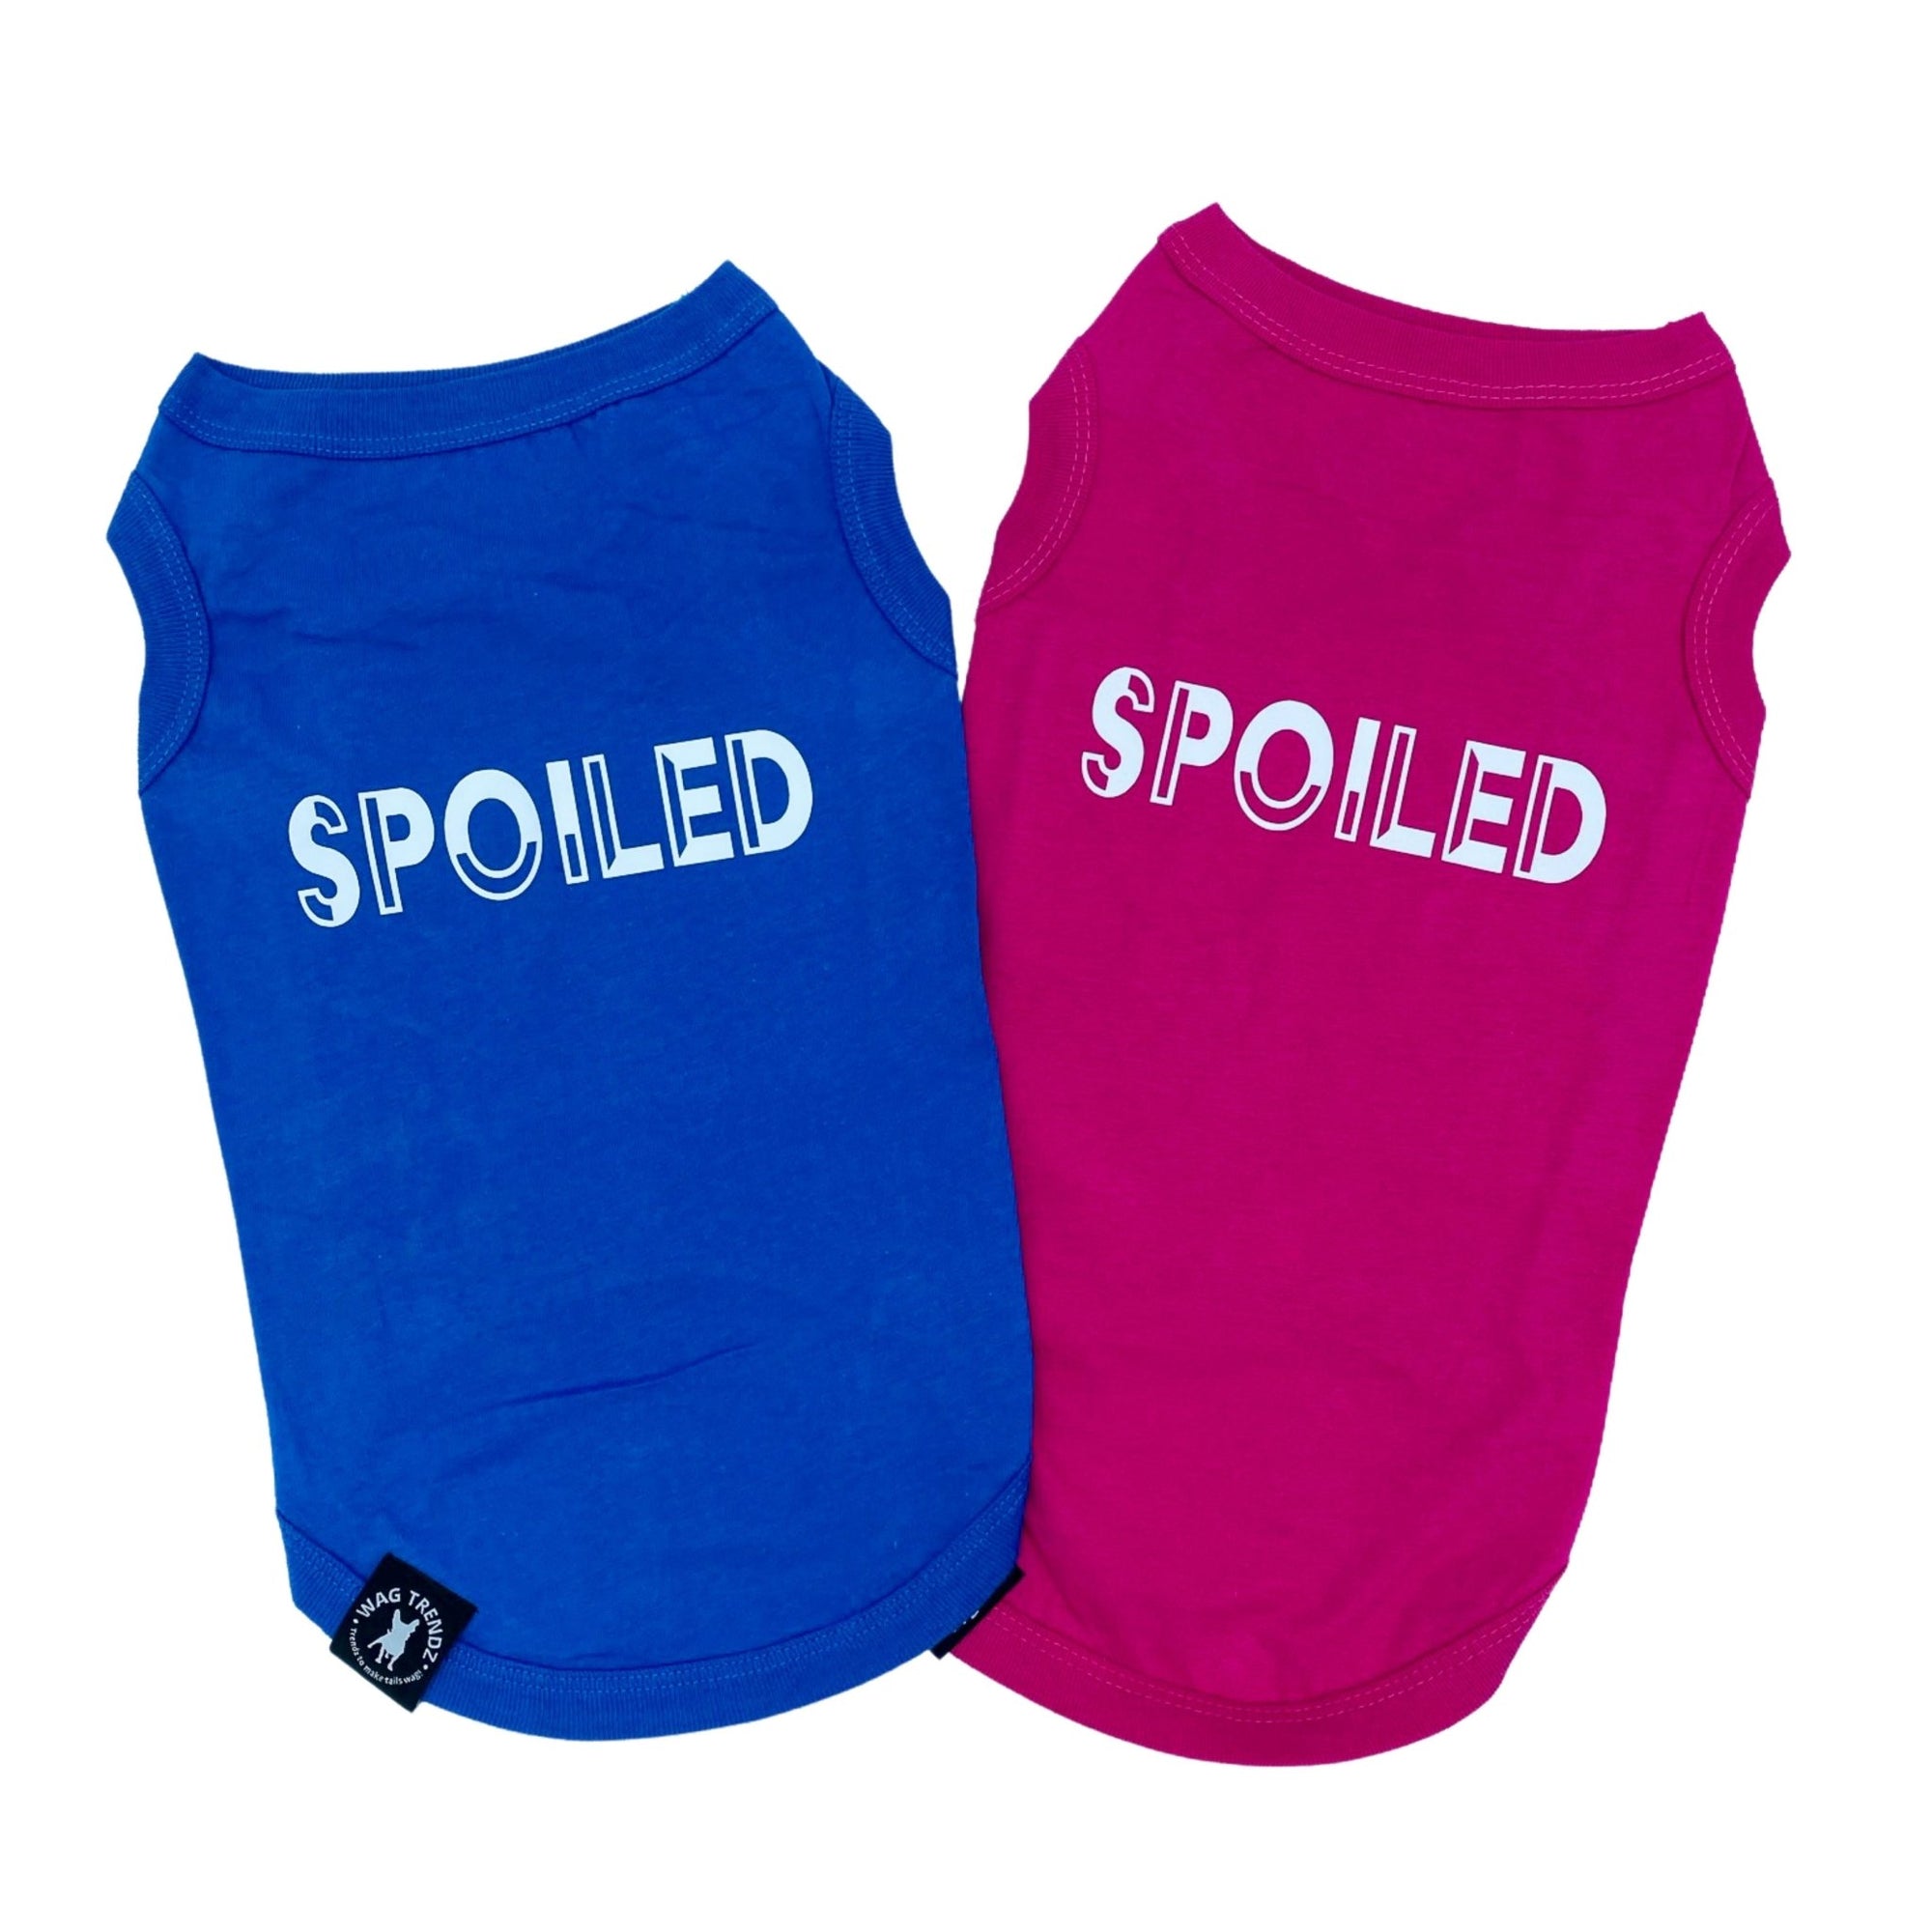 Dog T-Shirt - &quot;Spoiled&quot; - Royal Blue and Hot Pink dog t-shirts - back has SPOILED lettering in white - against solid white background - Wag Trendz